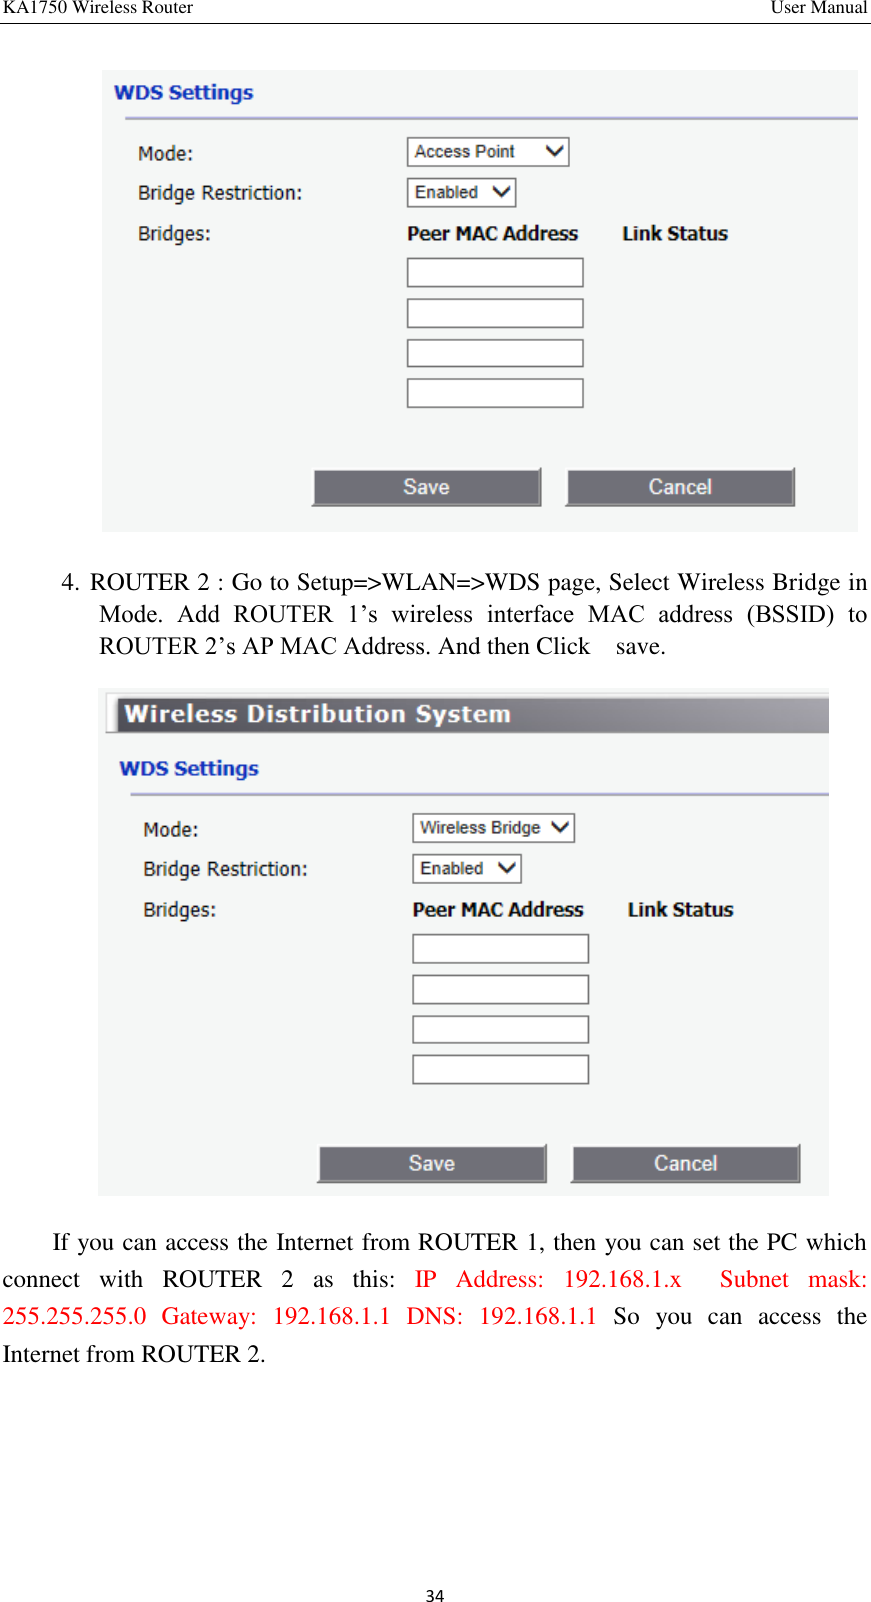 KA1750 Wireless Router       User Manual 34  4. ROUTER 2 : Go to Setup=&gt;WLAN=&gt;WDS page, Select Wireless Bridge in Mode.  Add  ROUTER  1’s  wireless  interface  MAC  address  (BSSID)  to ROUTER 2’s AP MAC Address. And then Click    save.        If you can access the Internet from ROUTER 1, then you can set the PC which connect  with  ROUTER  2  as  this:  IP  Address:  192.168.1.x    Subnet  mask: 255.255.255.0  Gateway:  192.168.1.1  DNS:  192.168.1.1  So  you  can  access  the Internet from ROUTER 2.     